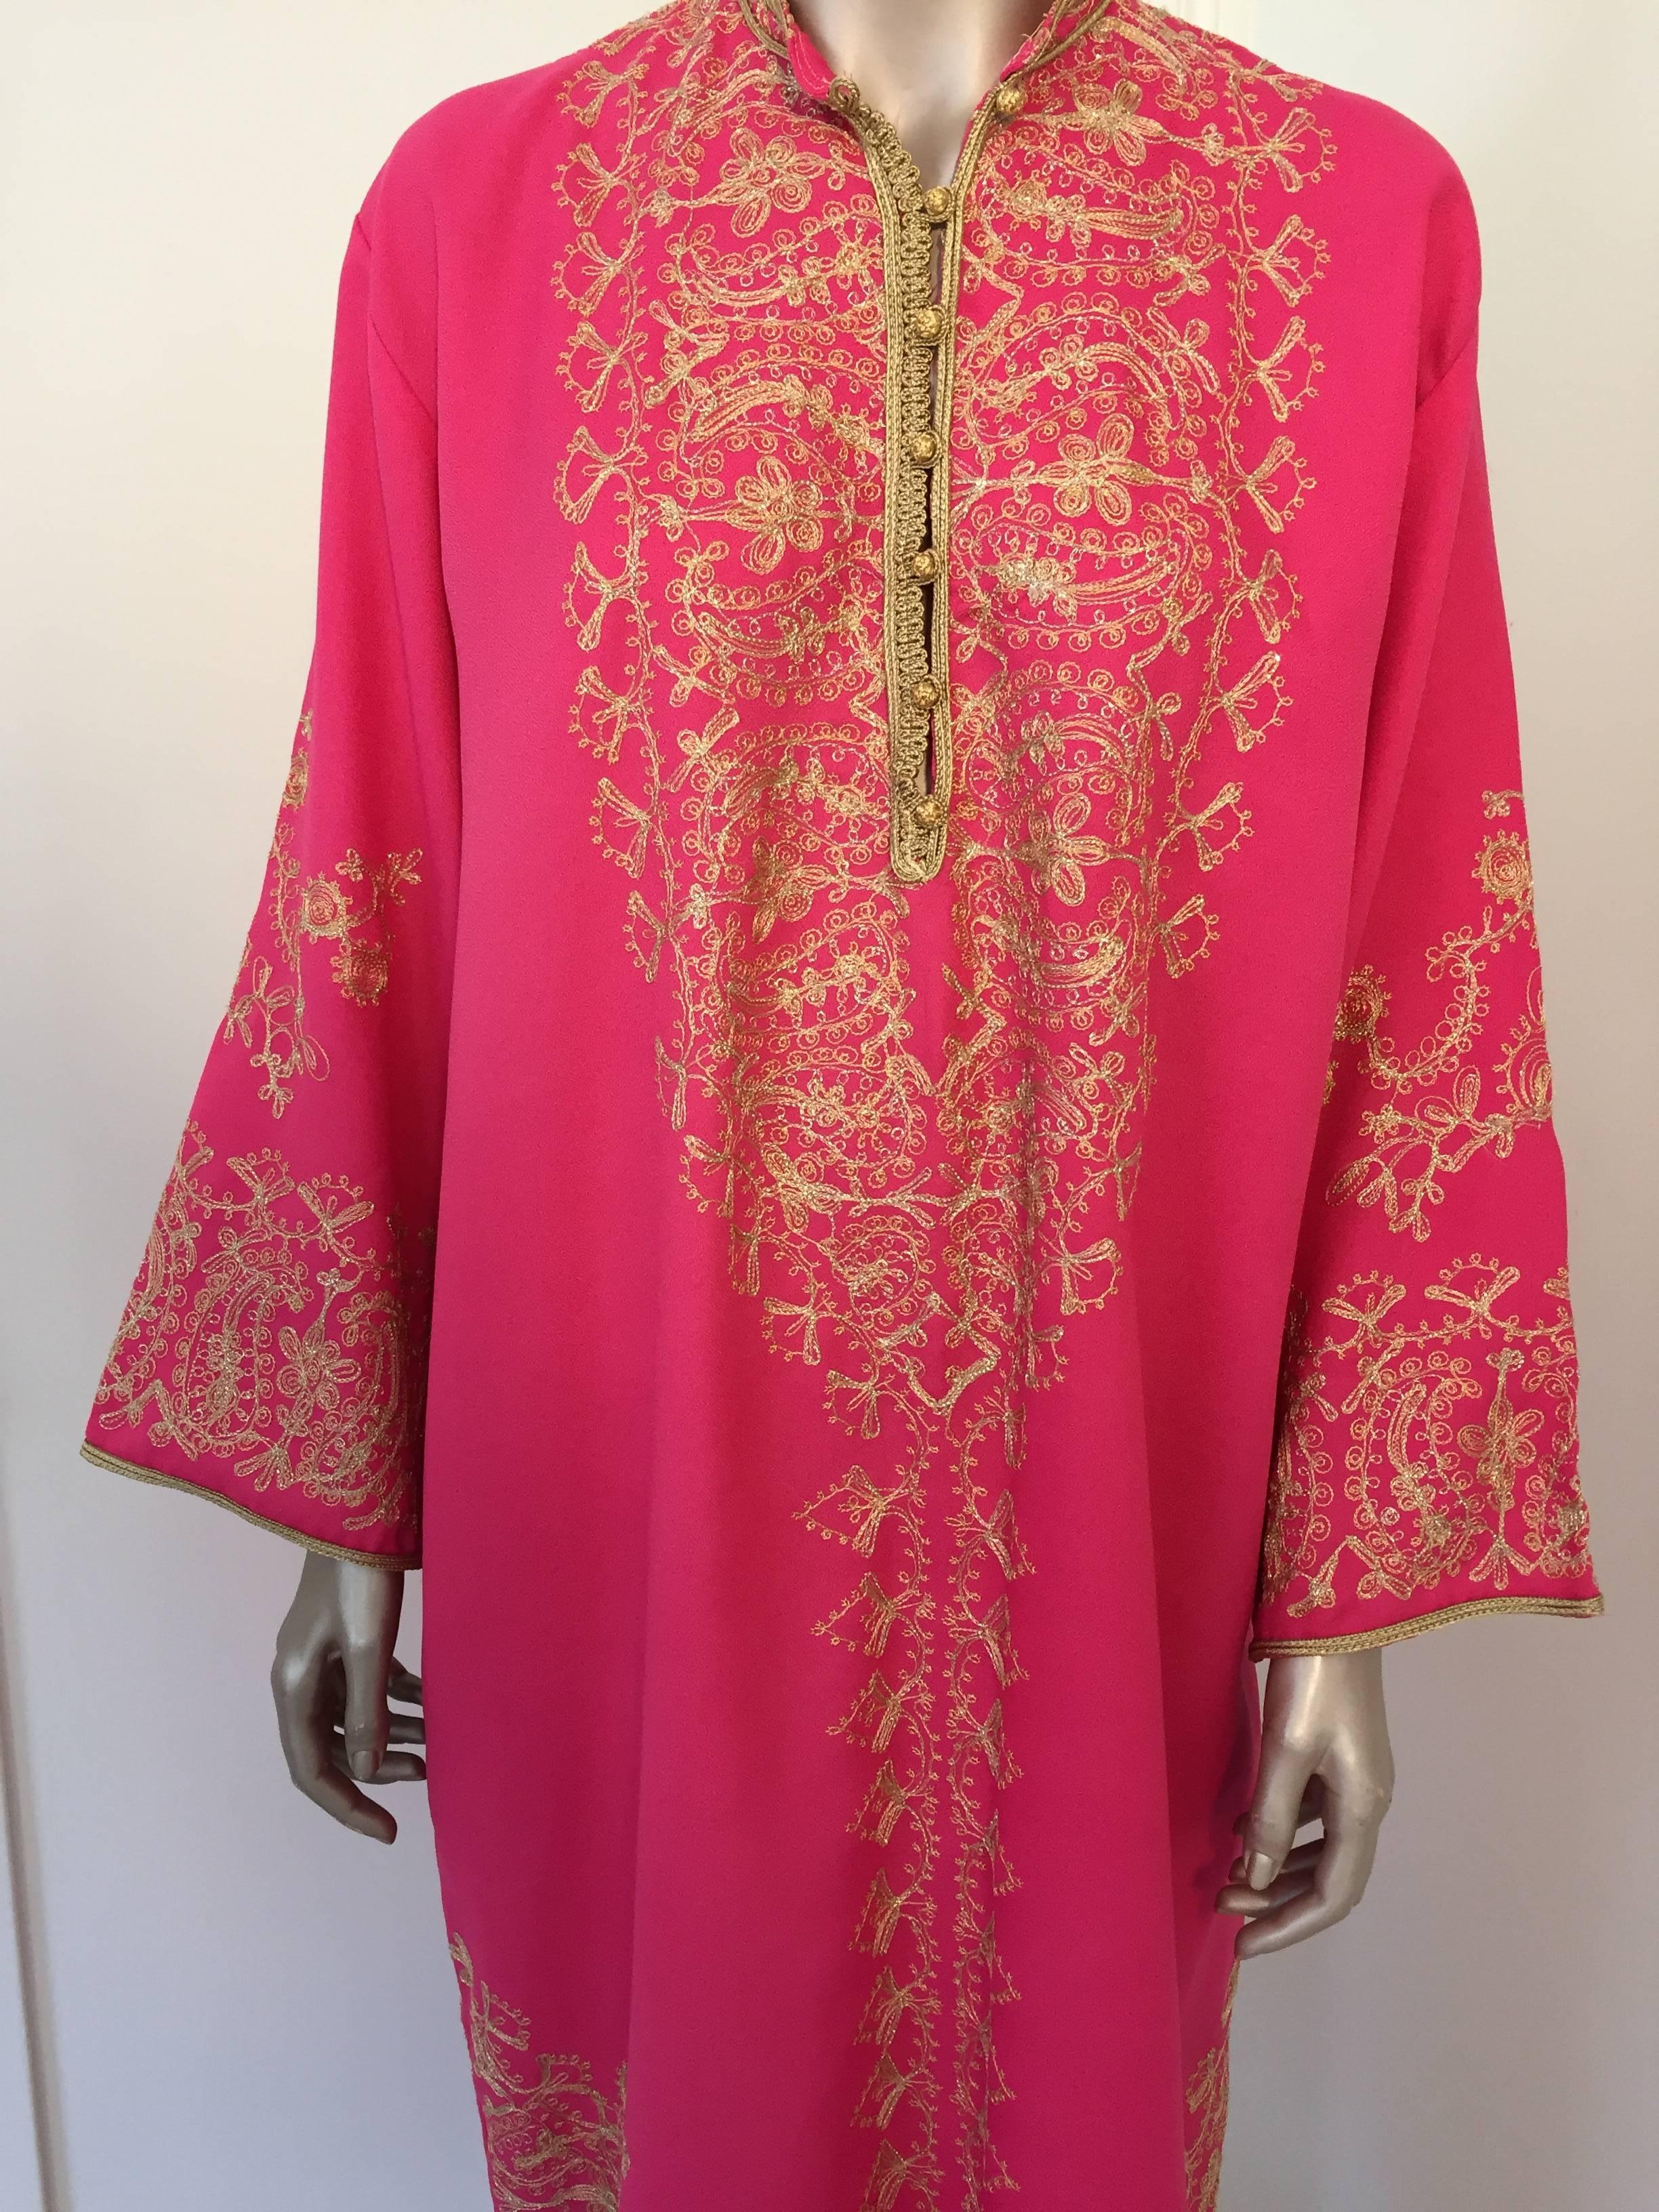 Elegant Moroccan caftan hot pink color embroidered with gold,
circa 1970s.
This long maxi poly jersey dress kaftan is embroidered and embellished with traditional designs in gold.
One of a kind evening Moroccan Middle Eastern gown.
The kaftan